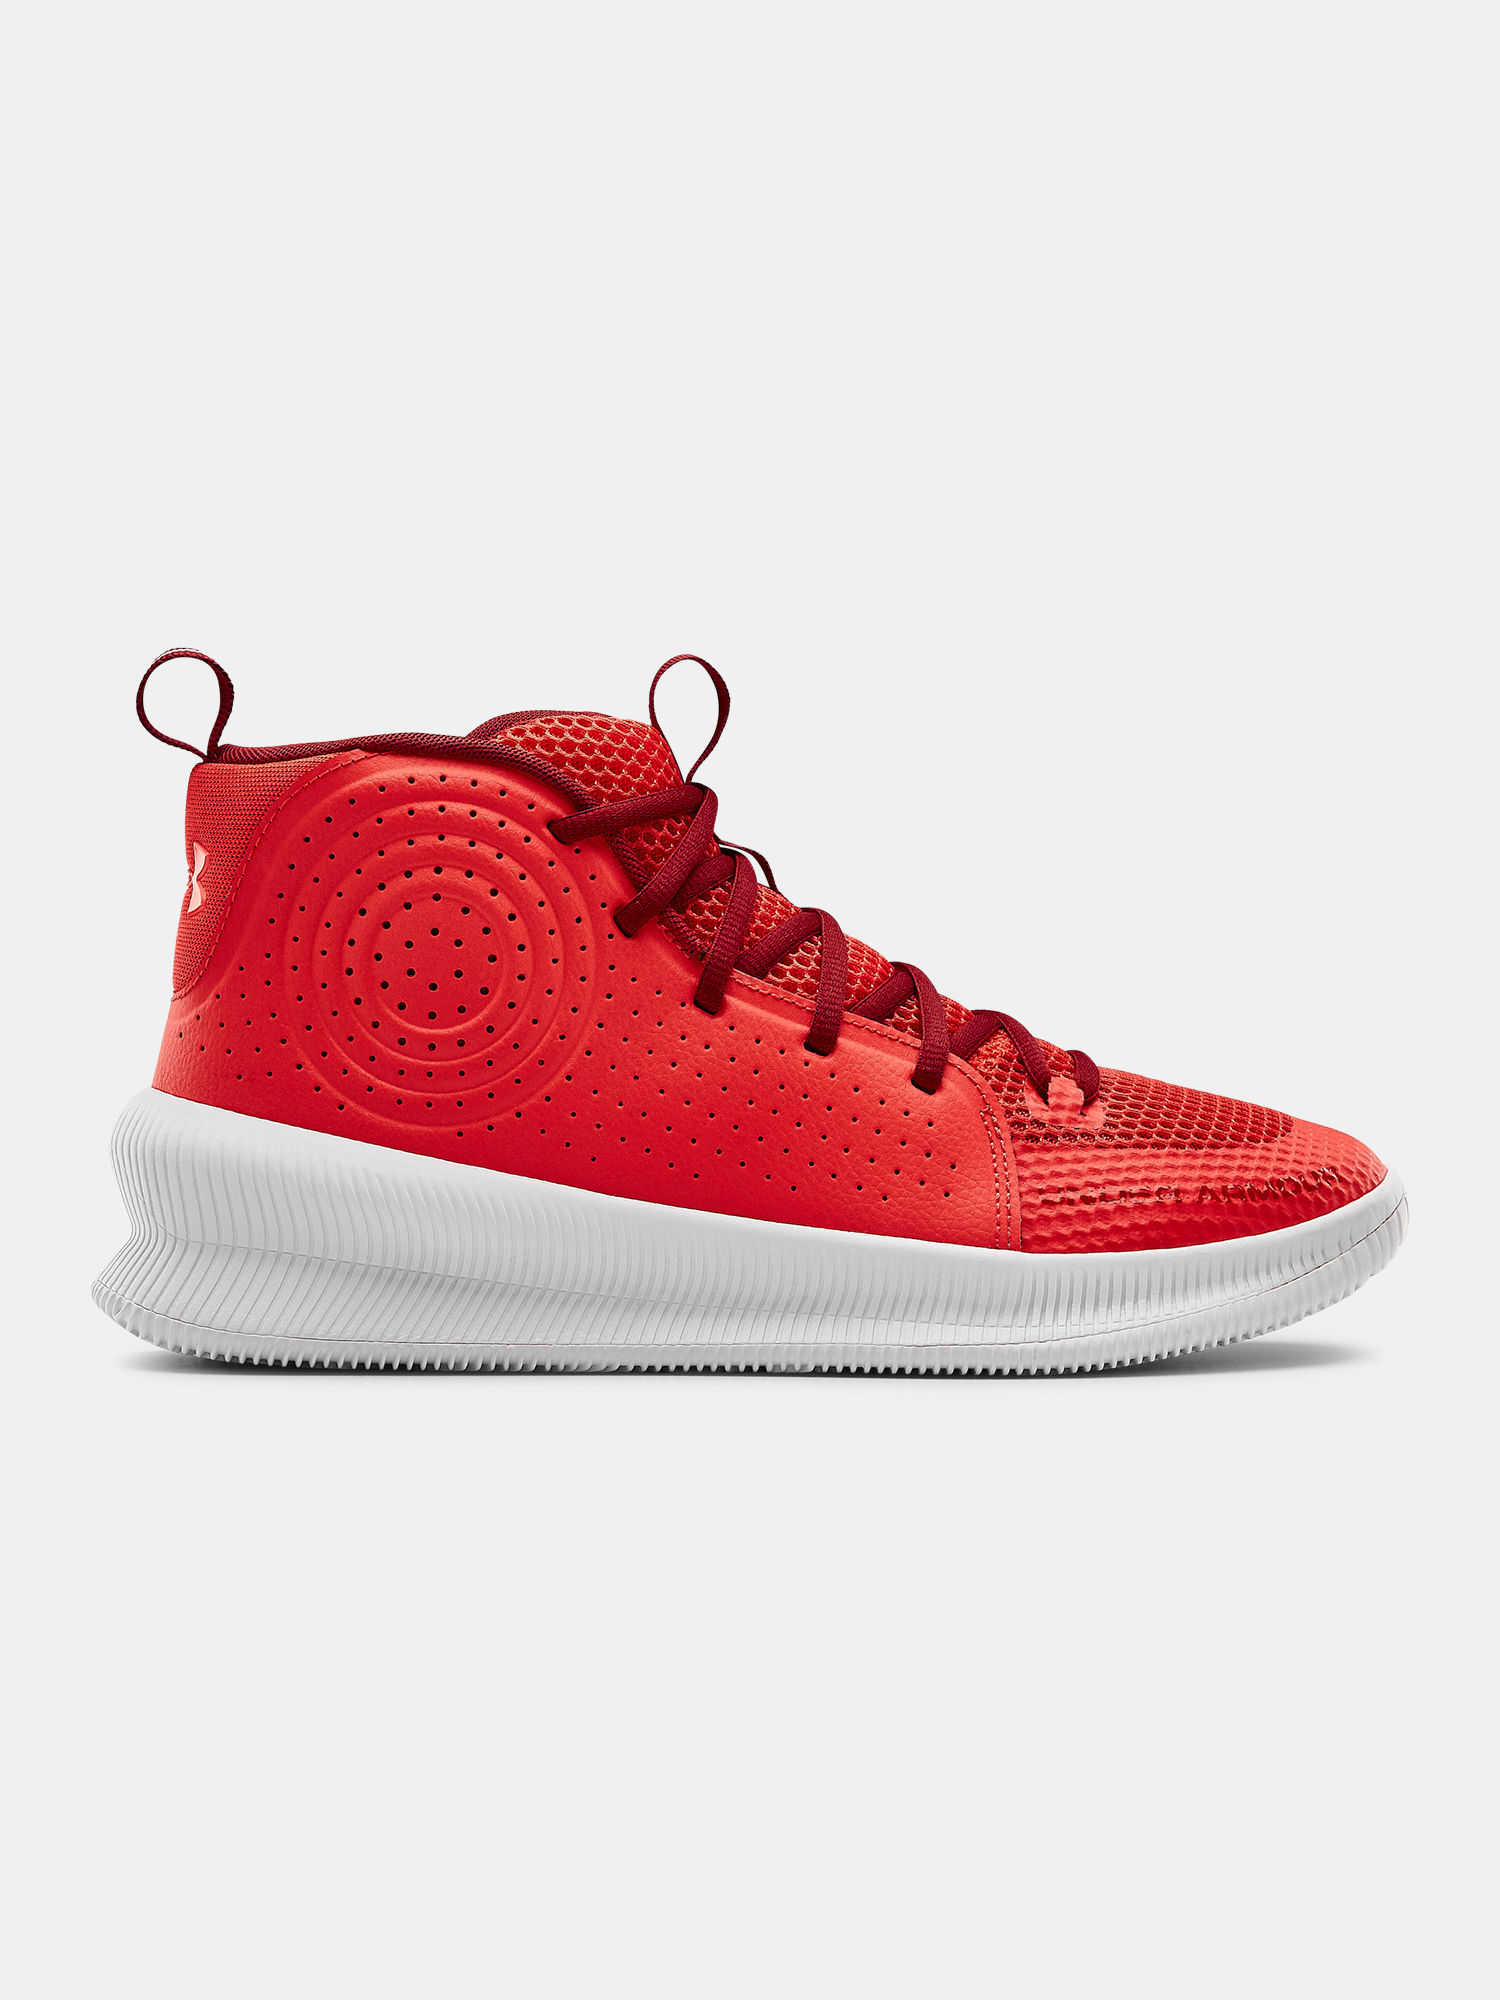 Boty Under Armour Jet-RED (1)